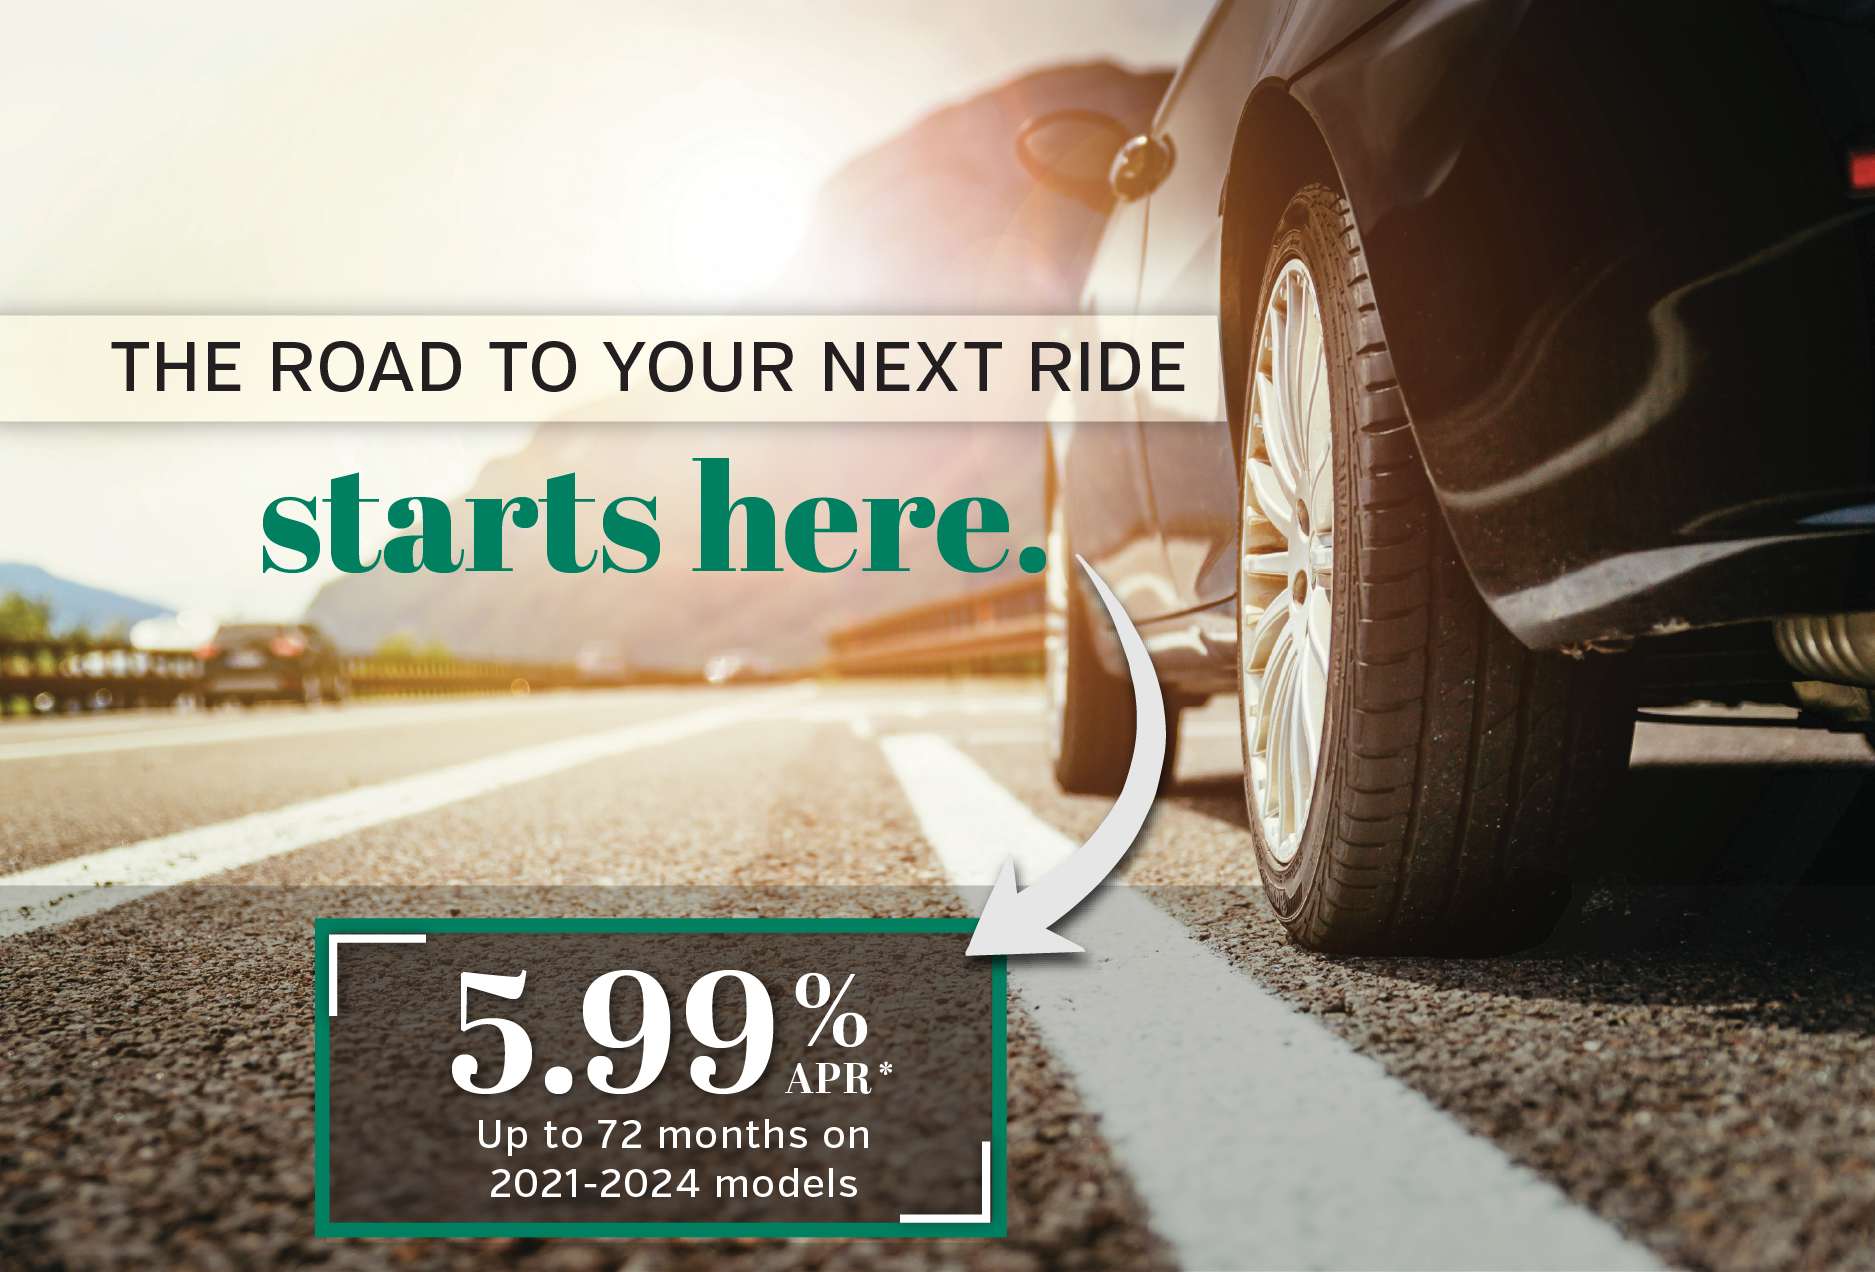 The Road to Your Next Ride Starts Here- FMFCU Auto Loans 5.99% APR* on terms up to 72-months